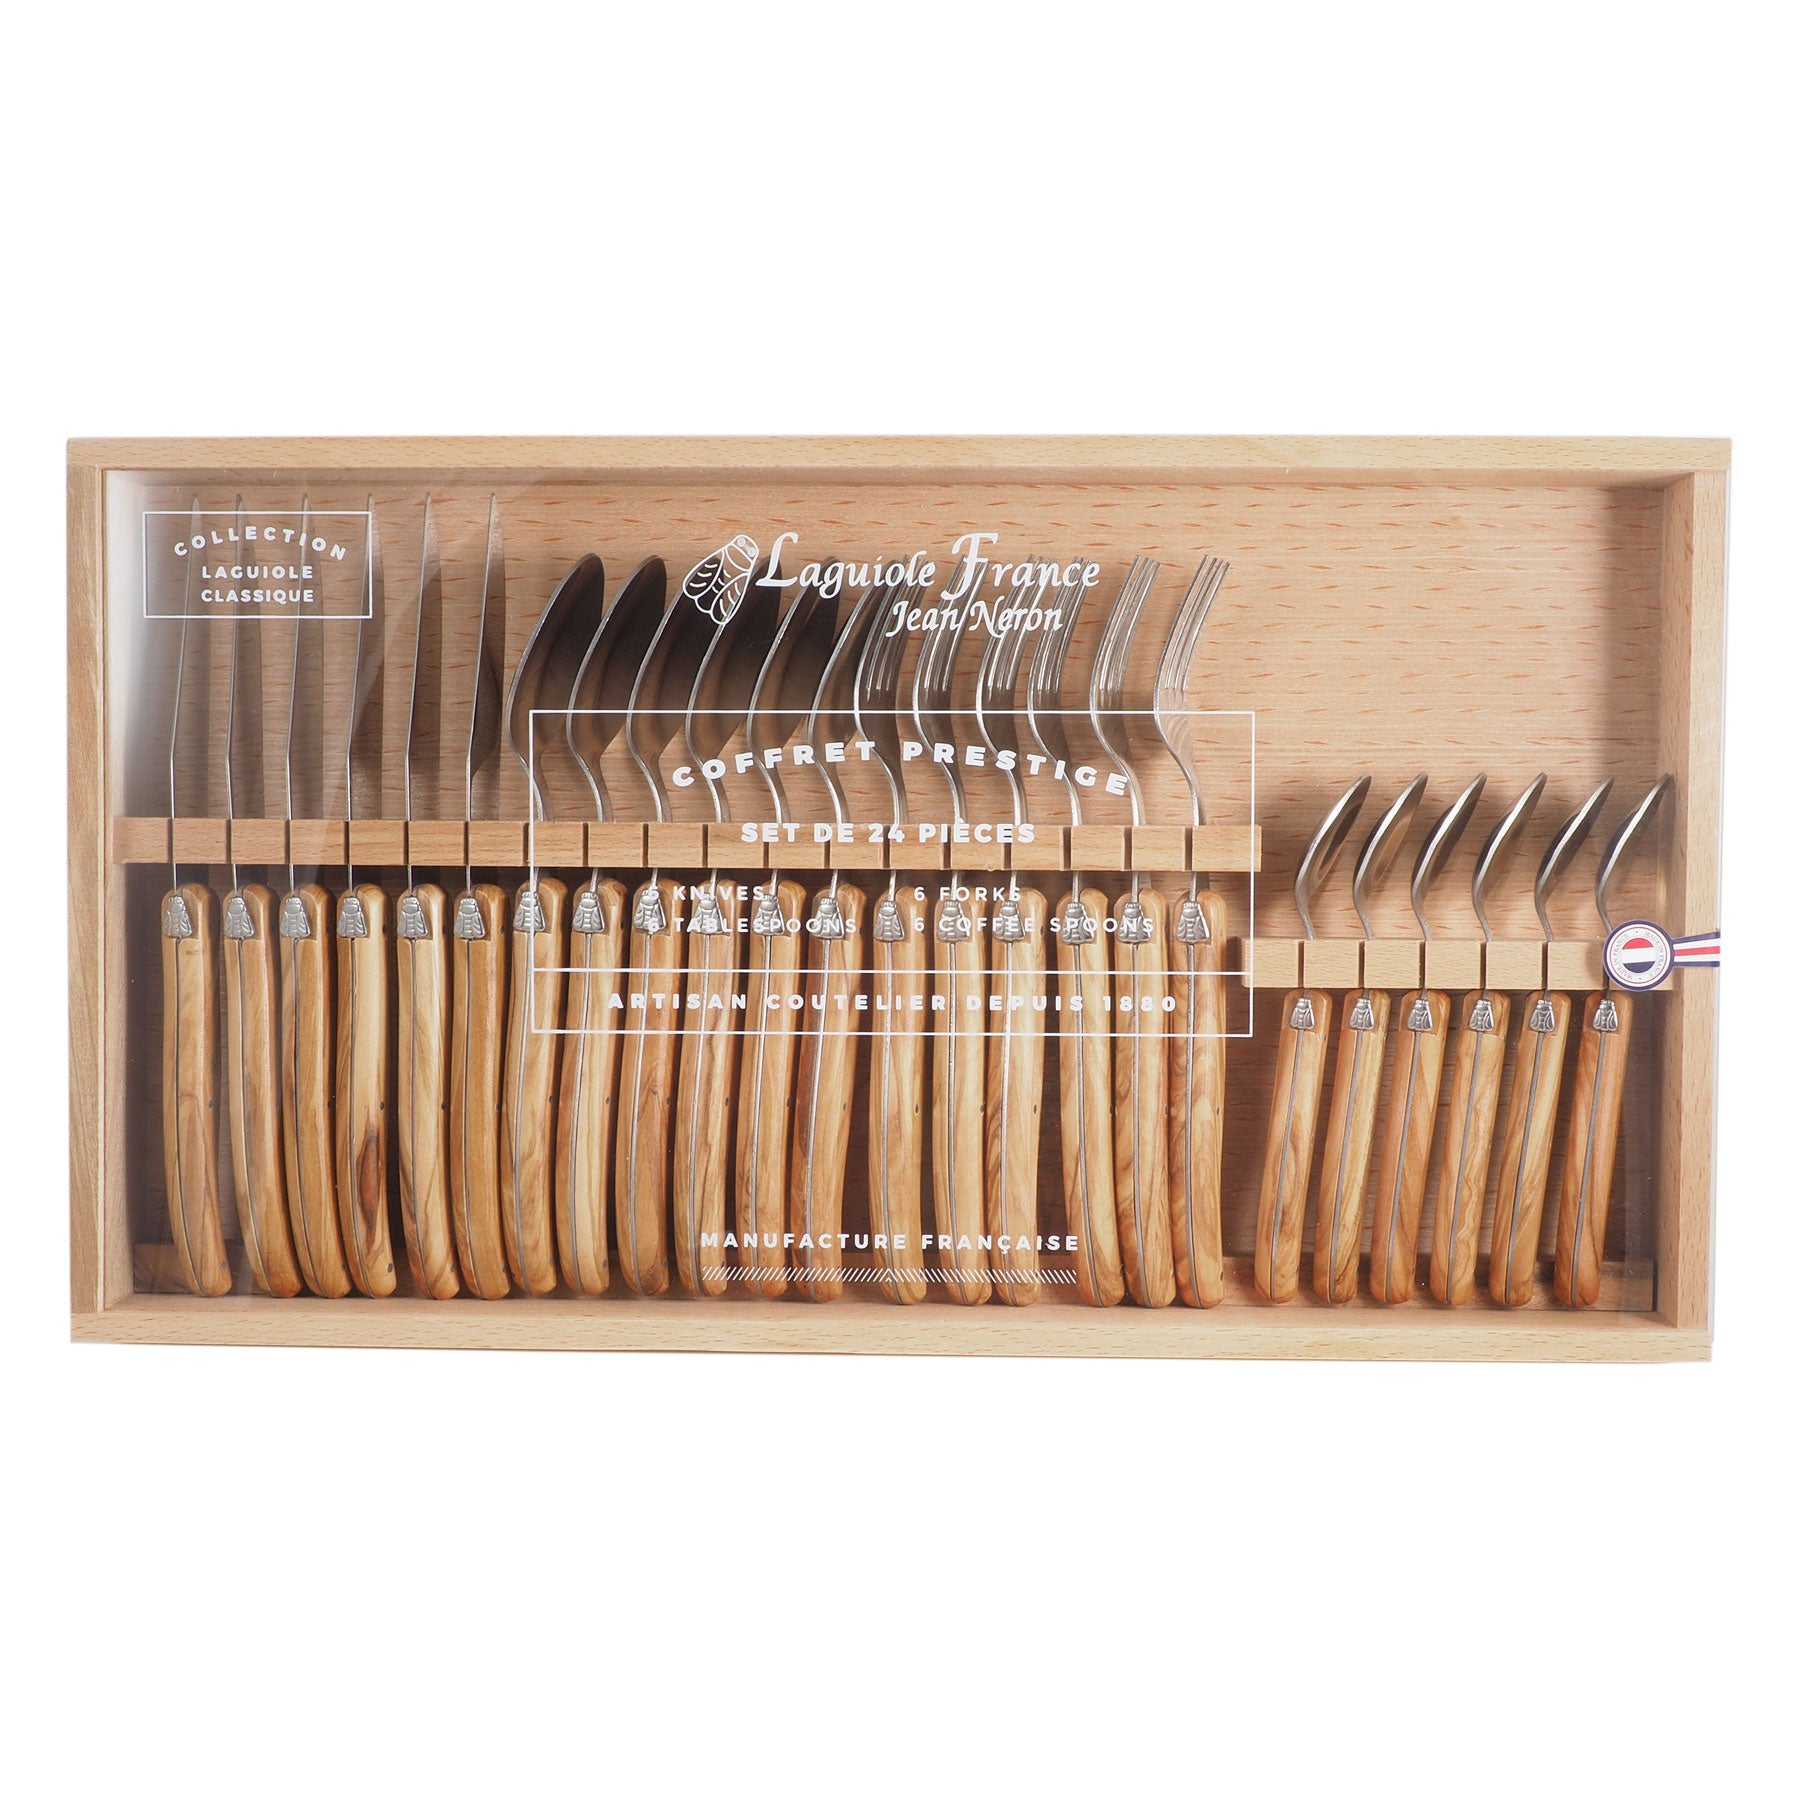 Laguiole Olivewood Flatware in Wooden Box with Acrylic Lid (Set of 24) Cutlery Set Laguiole Brand_Laguiole Carving Sets Kitchen_Dinnerware Laguiole 7900-54000_OL_AL_Laguiole-Olivewood-Set-of-24-Flatware